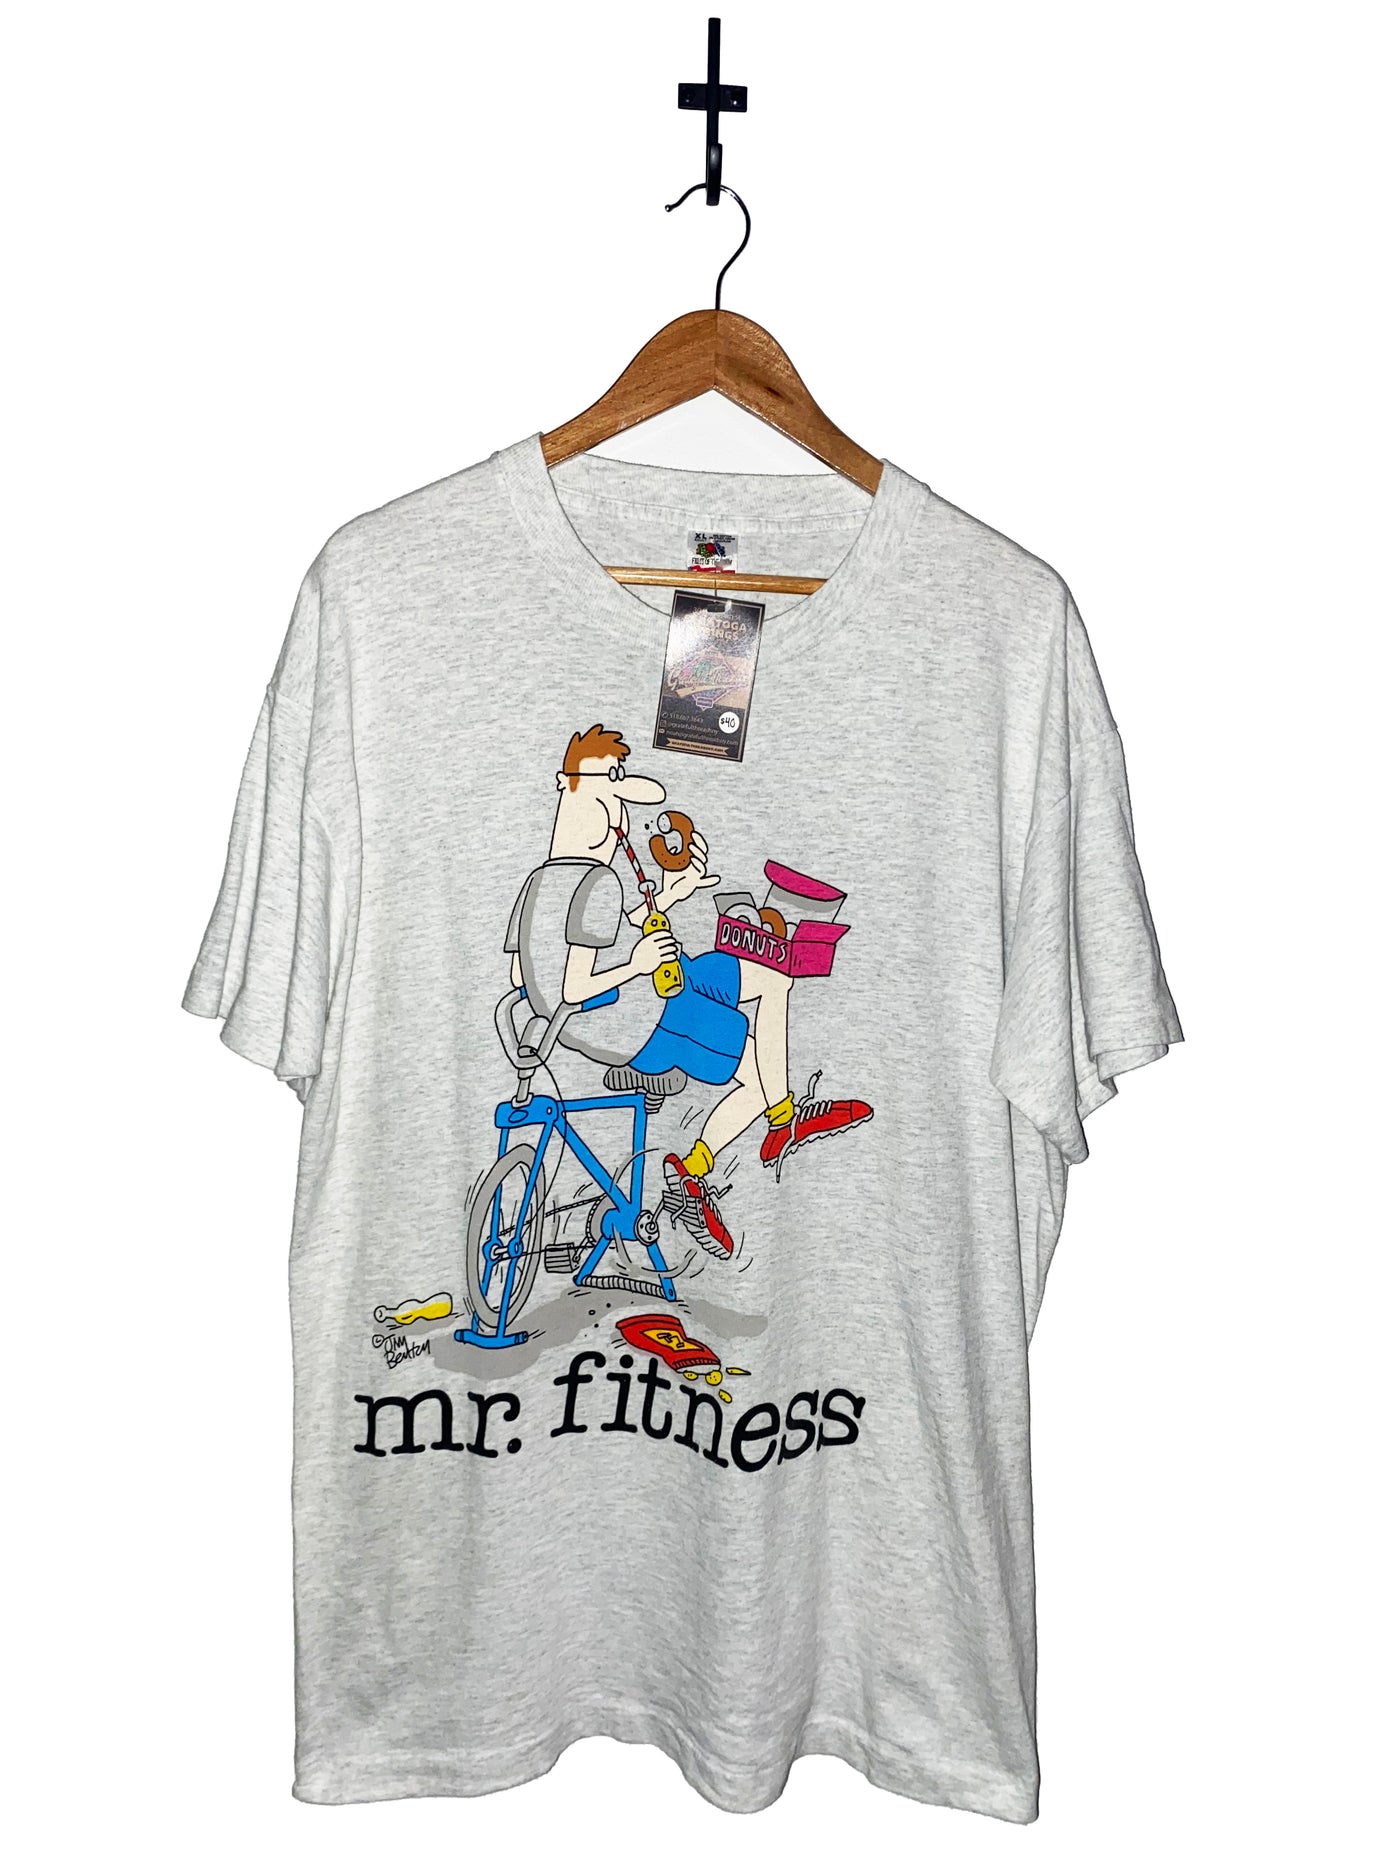 Vintage 90s Mr. Fitness Comedy T-Shirt